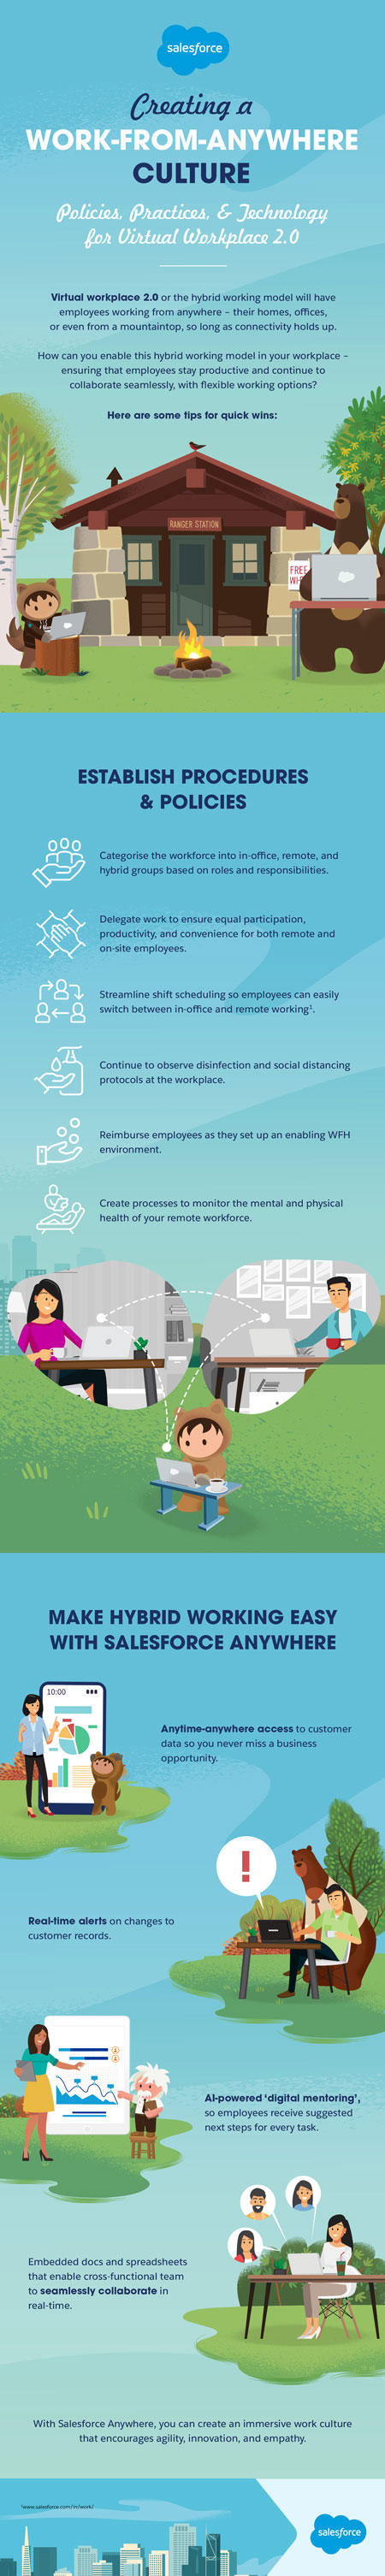 The Hybrid Workplace Checklist: A Quick Guide to Prepping your Workplace for the Newest Normal